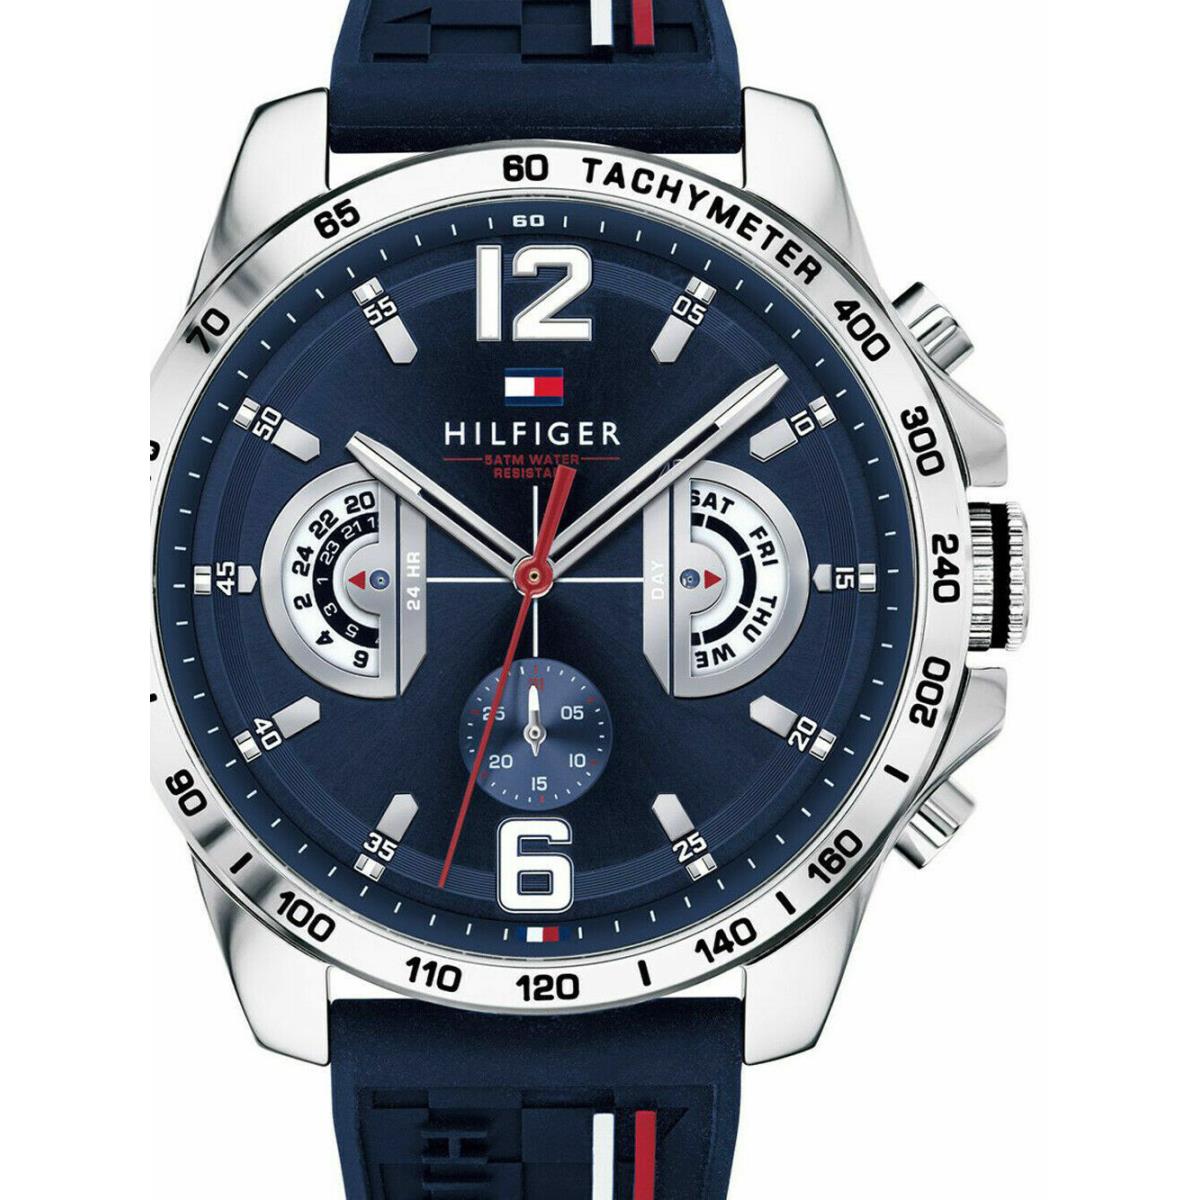 Tommy Hilfiger Sport Decker Silicone Strap Multi-function Men s Watch 1791476 - Dial: Blue, Band: Blue